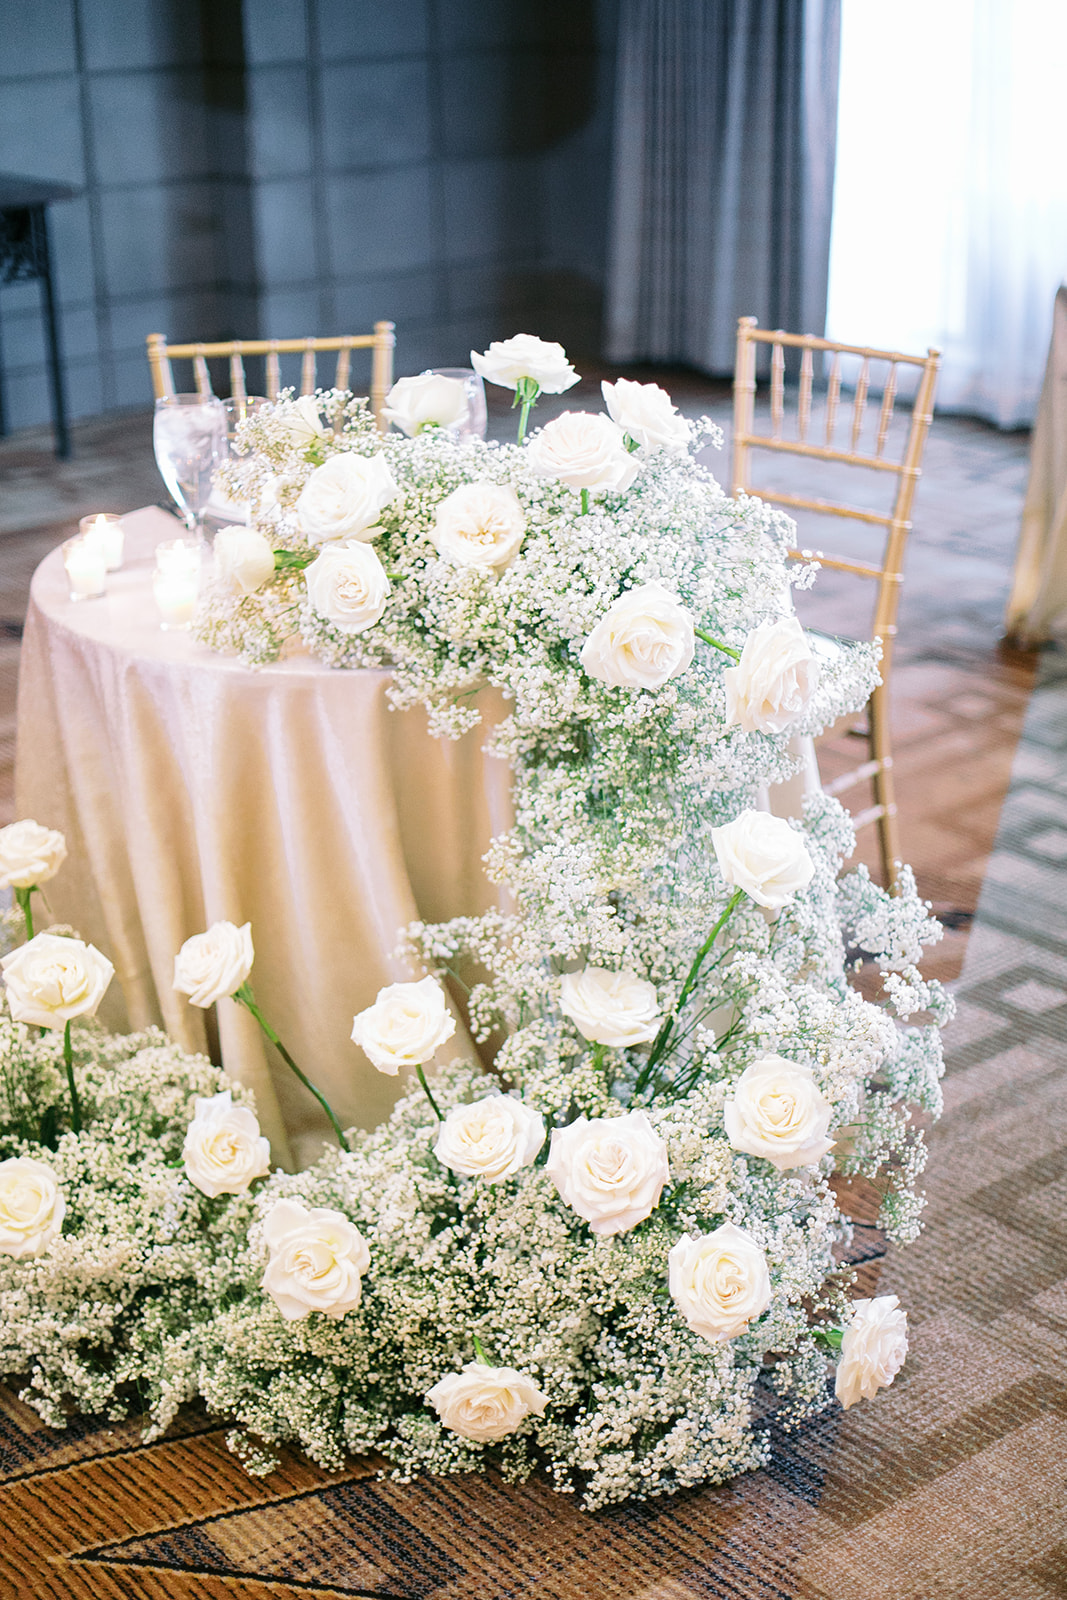 Lush, cascading baby's breath and roses garland from sweetheart table at wedding.